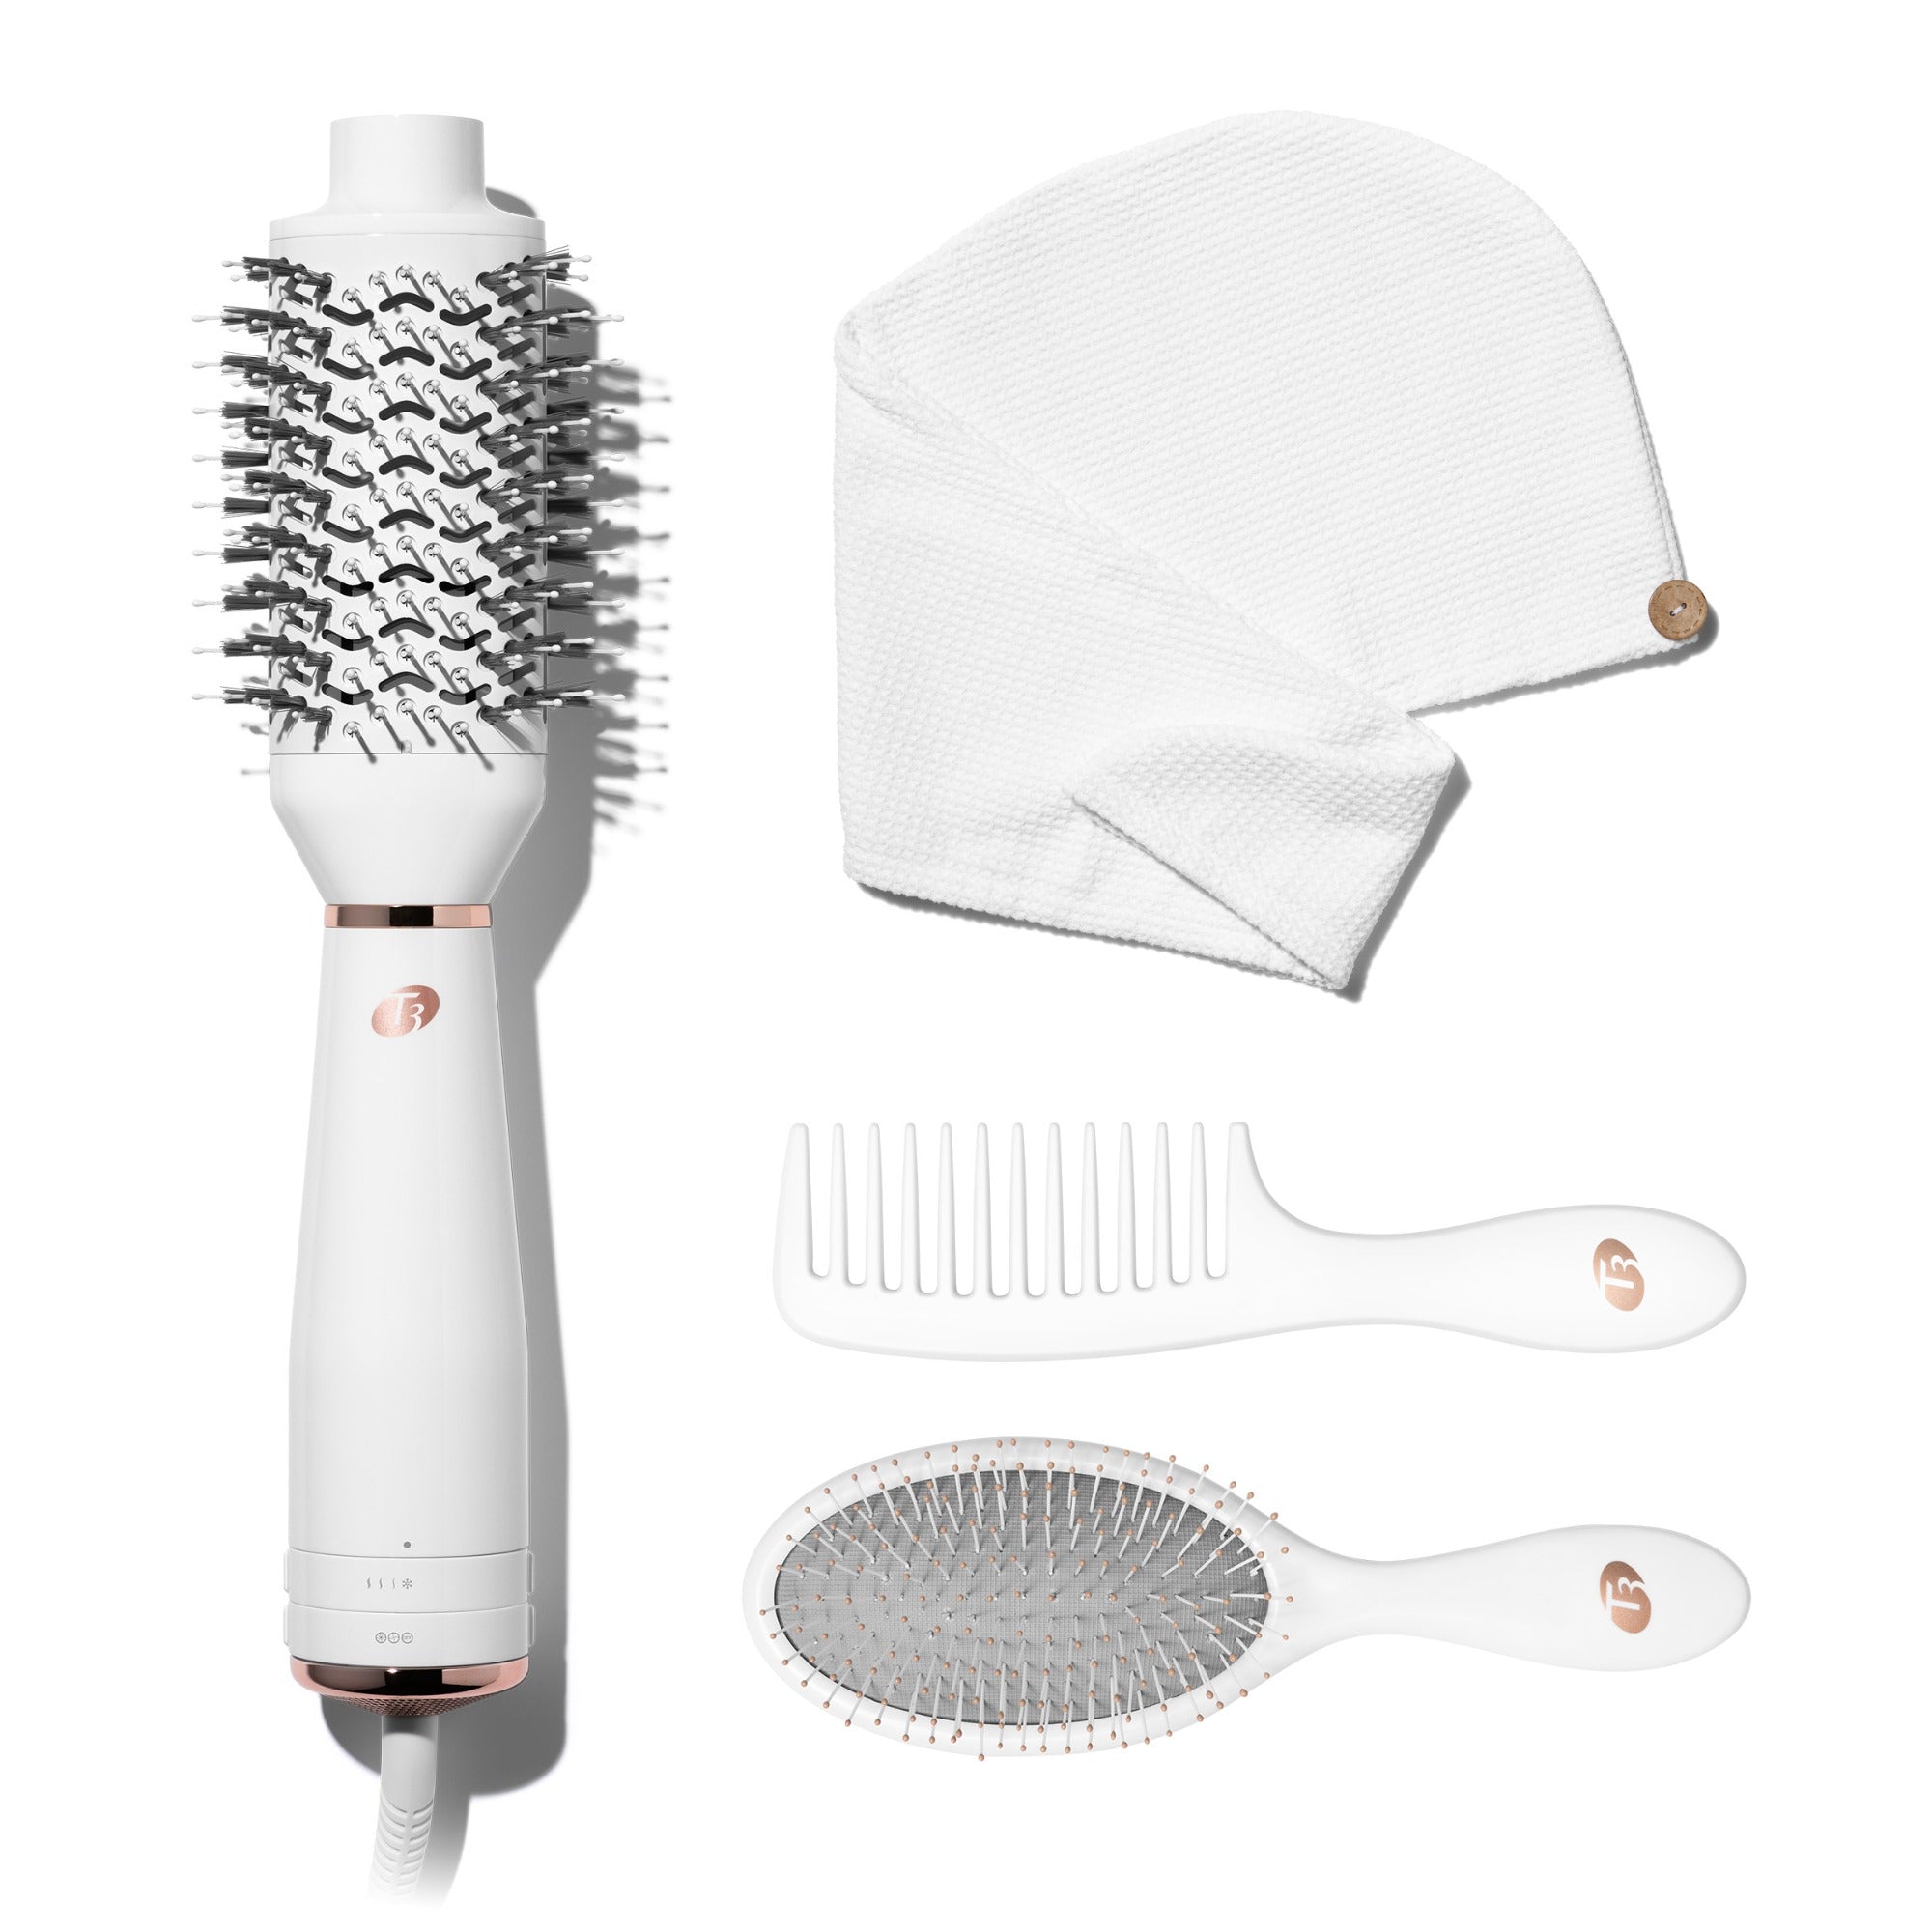 Complete AireBrush Set including T3 AireBrush, T3 LUXE Turban Towel, and T3 Detangle Duo